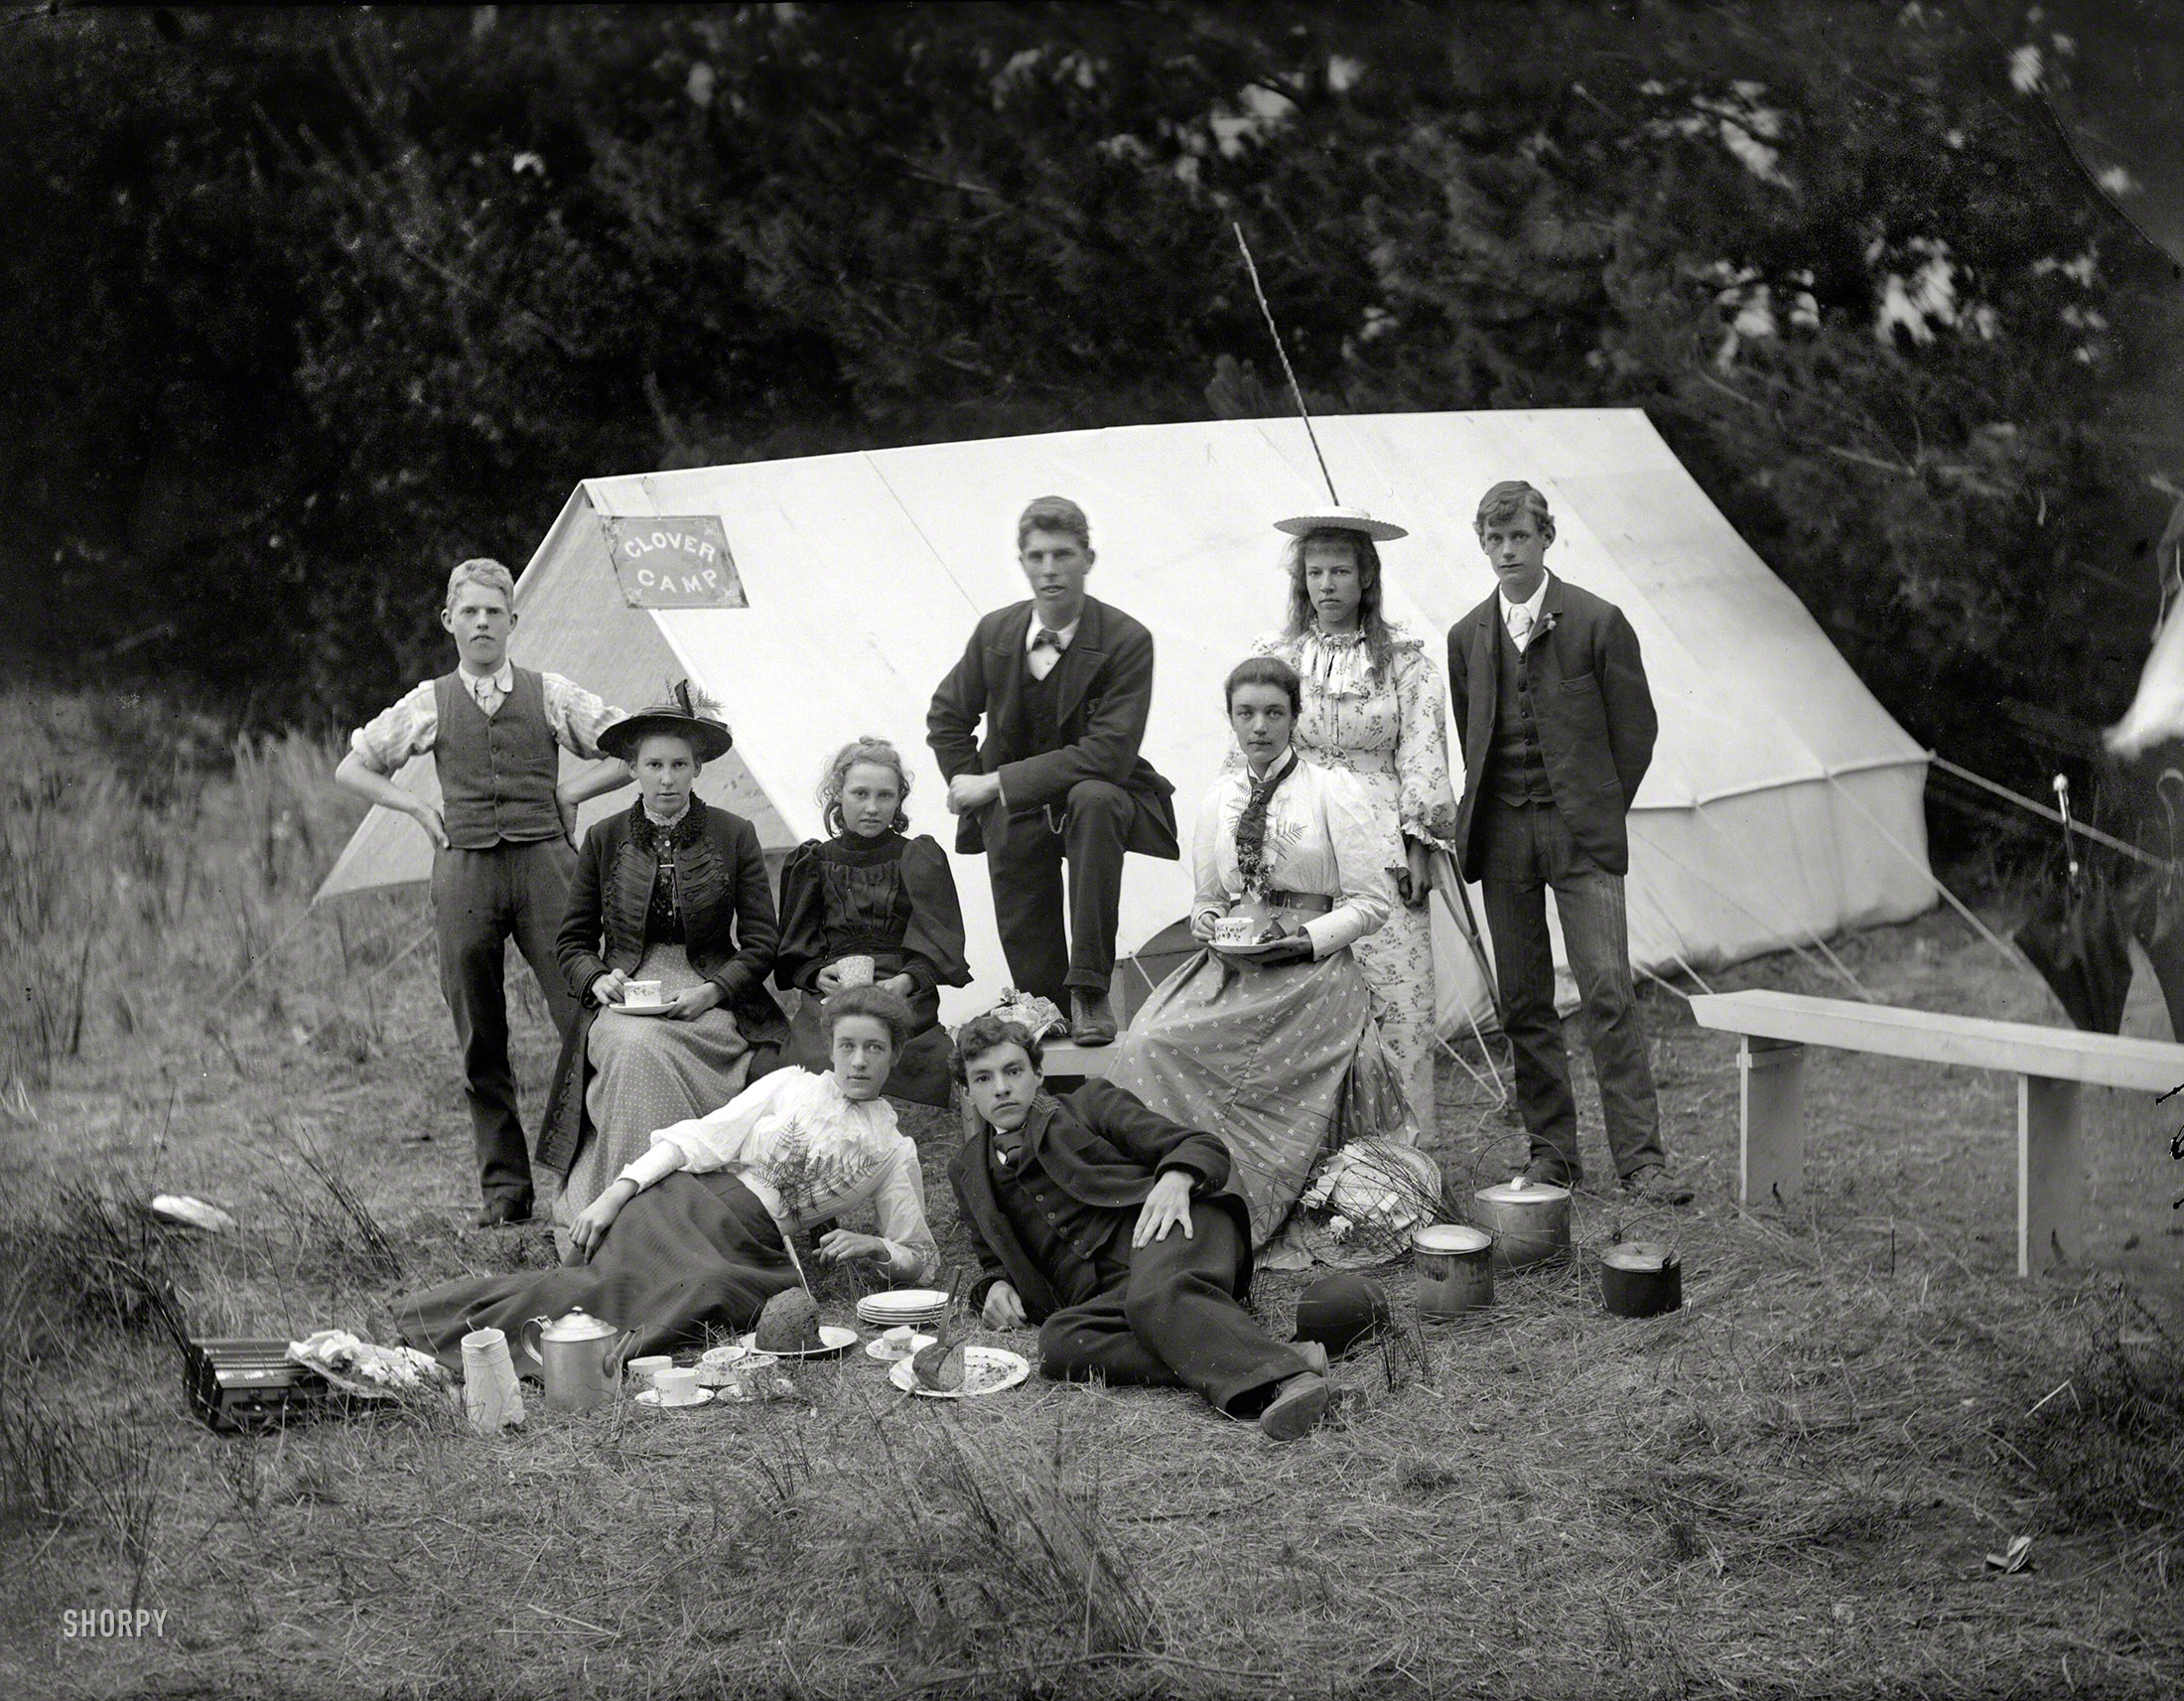 Circa 1905 near Christchurch, New Zealand. "Young people with camping gear, having tea and cake in front of tent with 'Clover Camp' sign." These natty campers have even brought umbrellas. Glass plate by Adam Maclay. View full size.